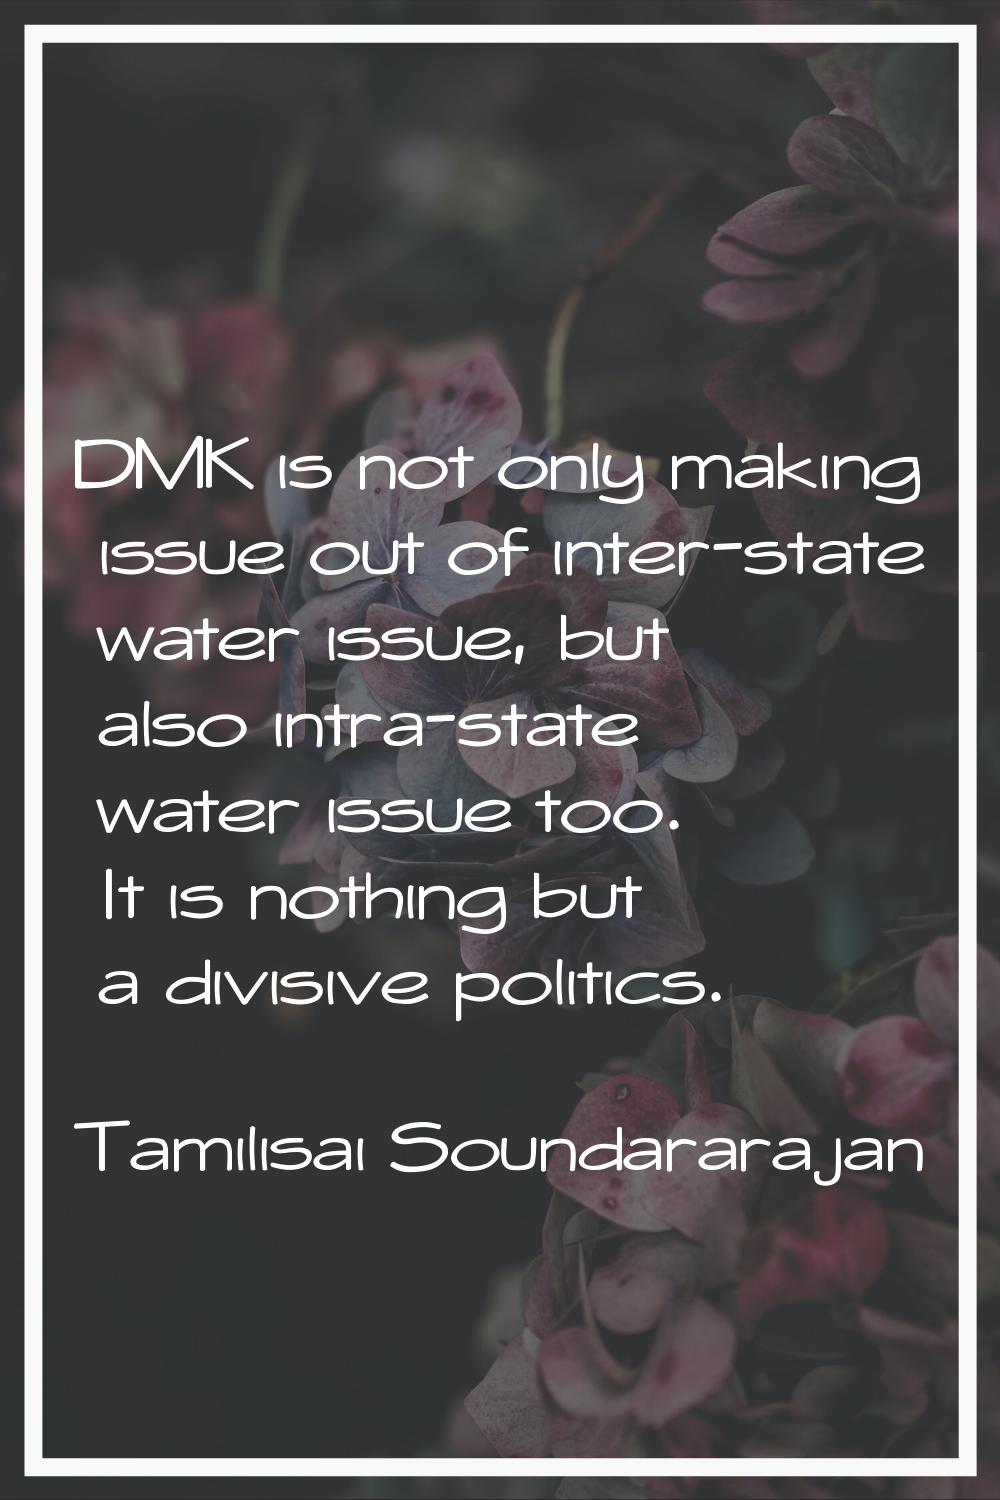 DMK is not only making issue out of inter-state water issue, but also intra-state water issue too. 